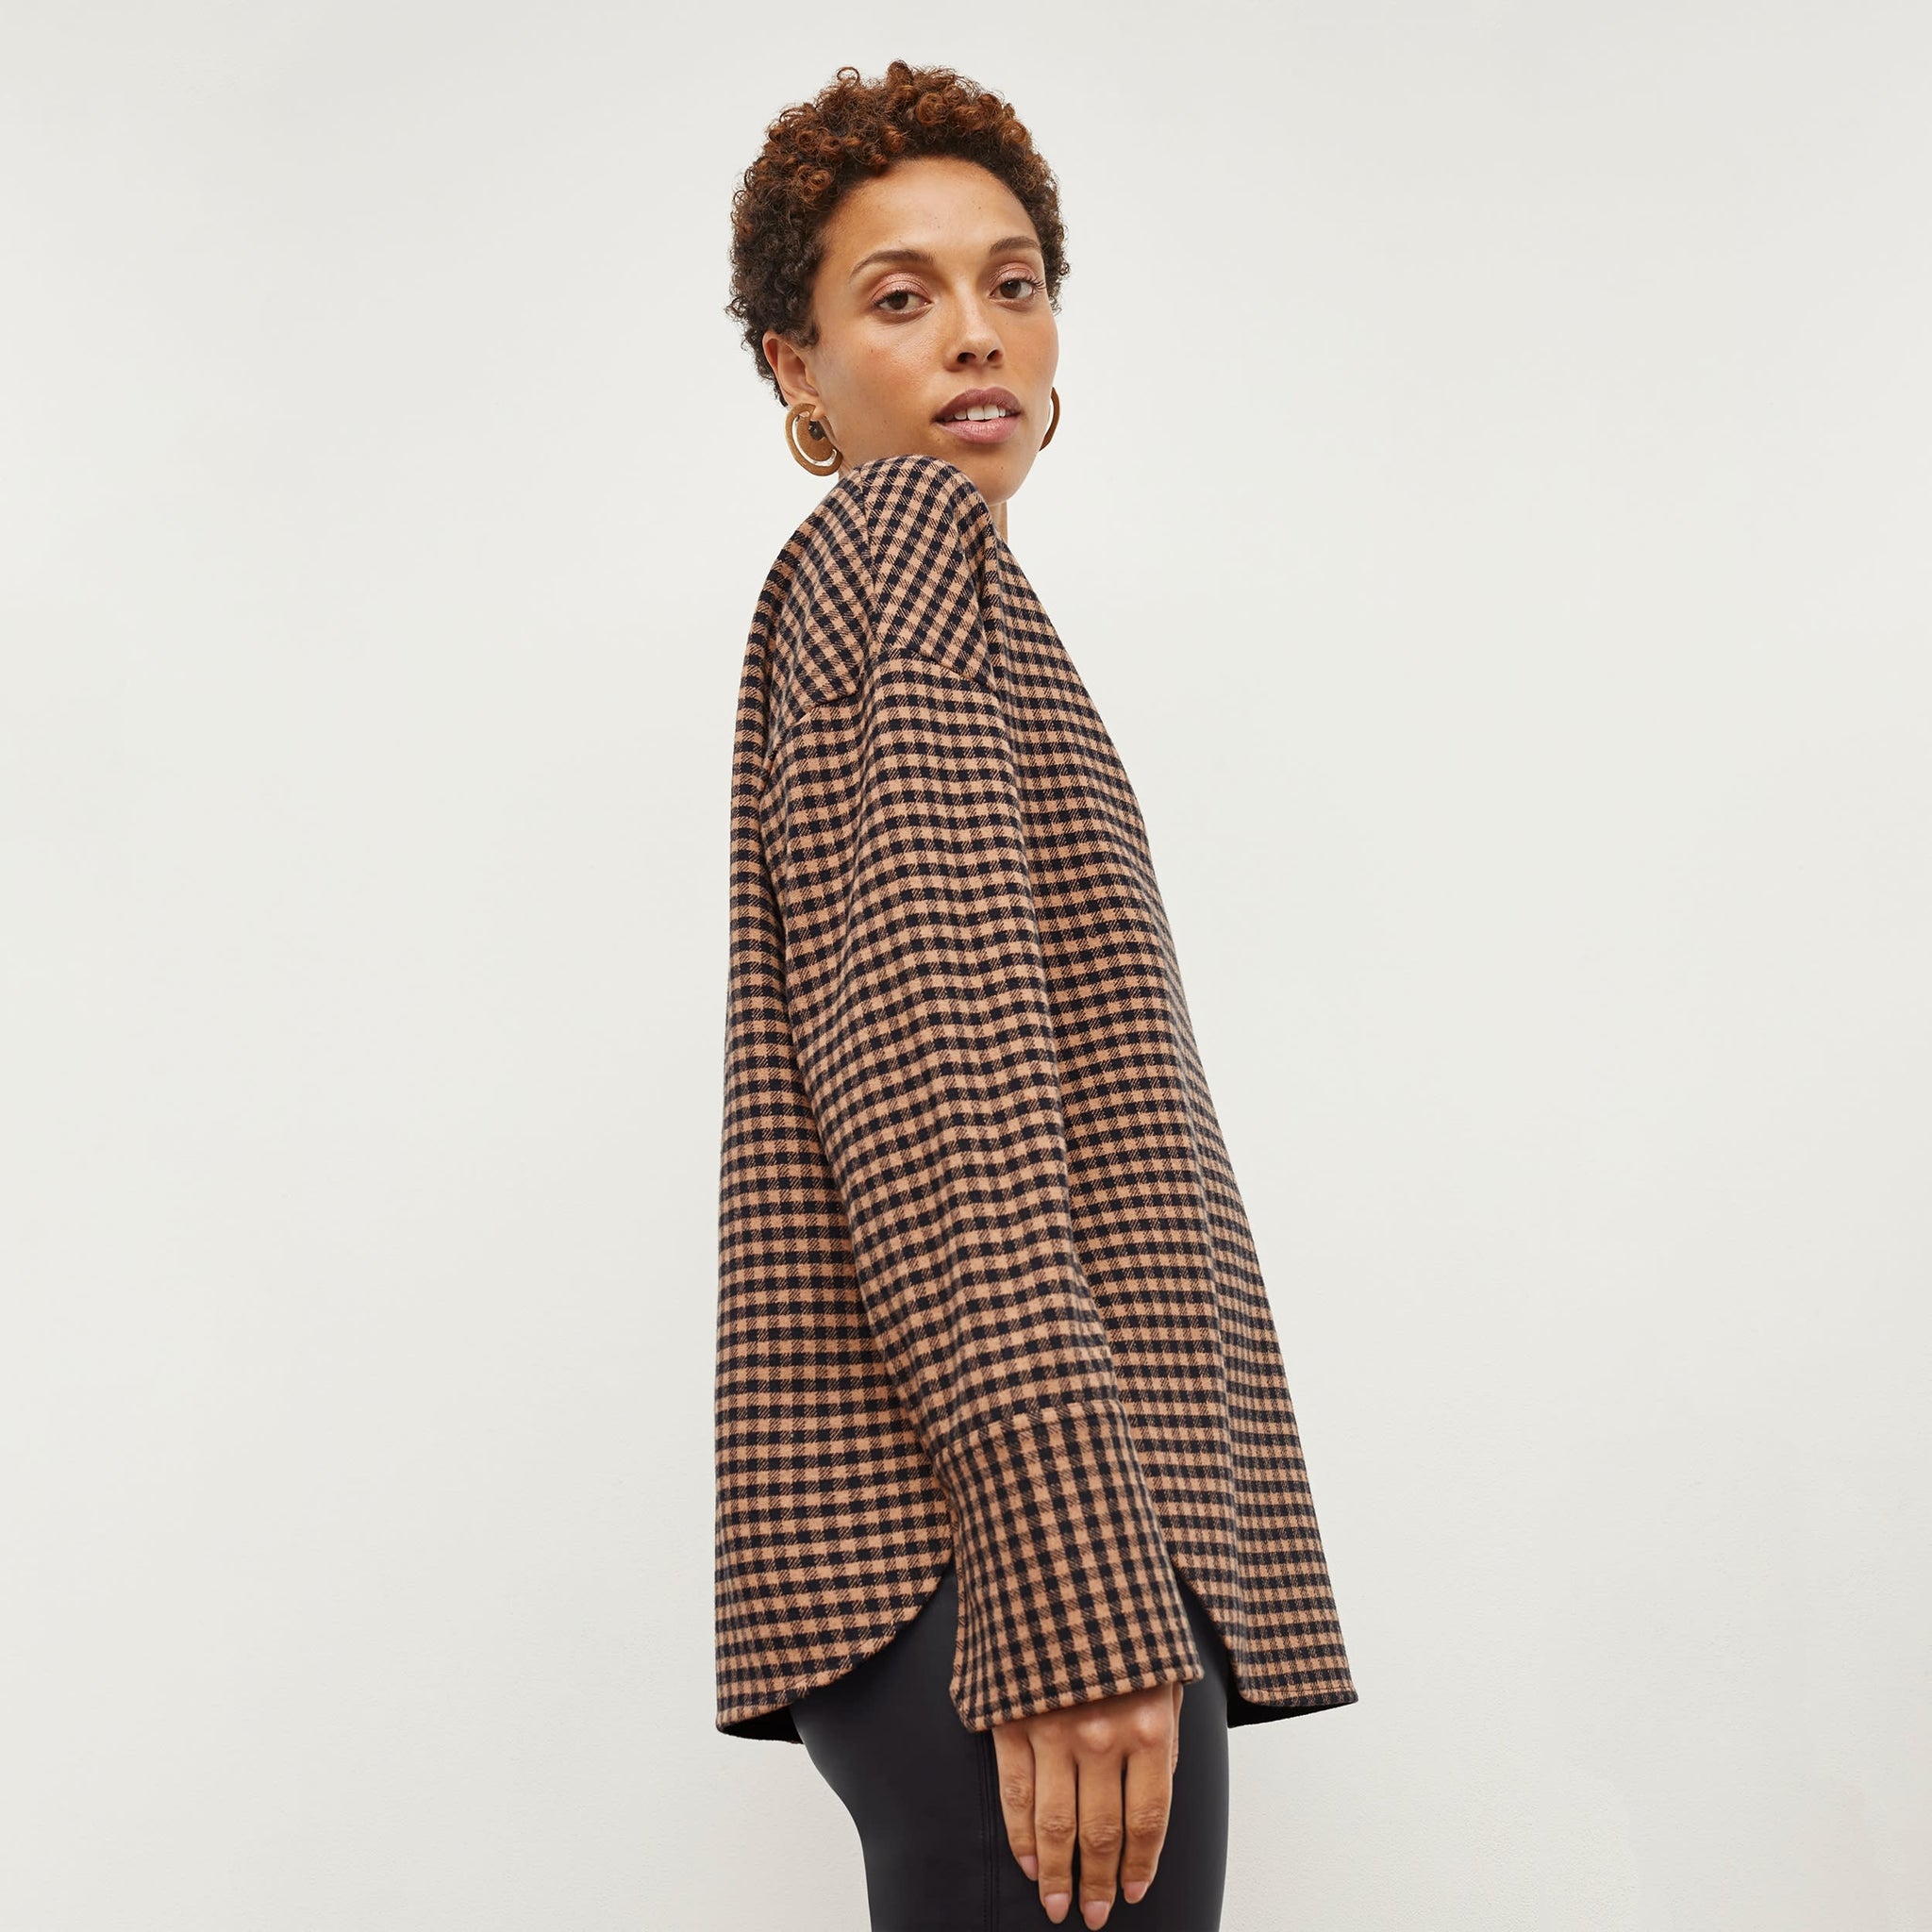 Side image of a woman standing wearing the Tully Top—Plaid Knit in Camel / Black